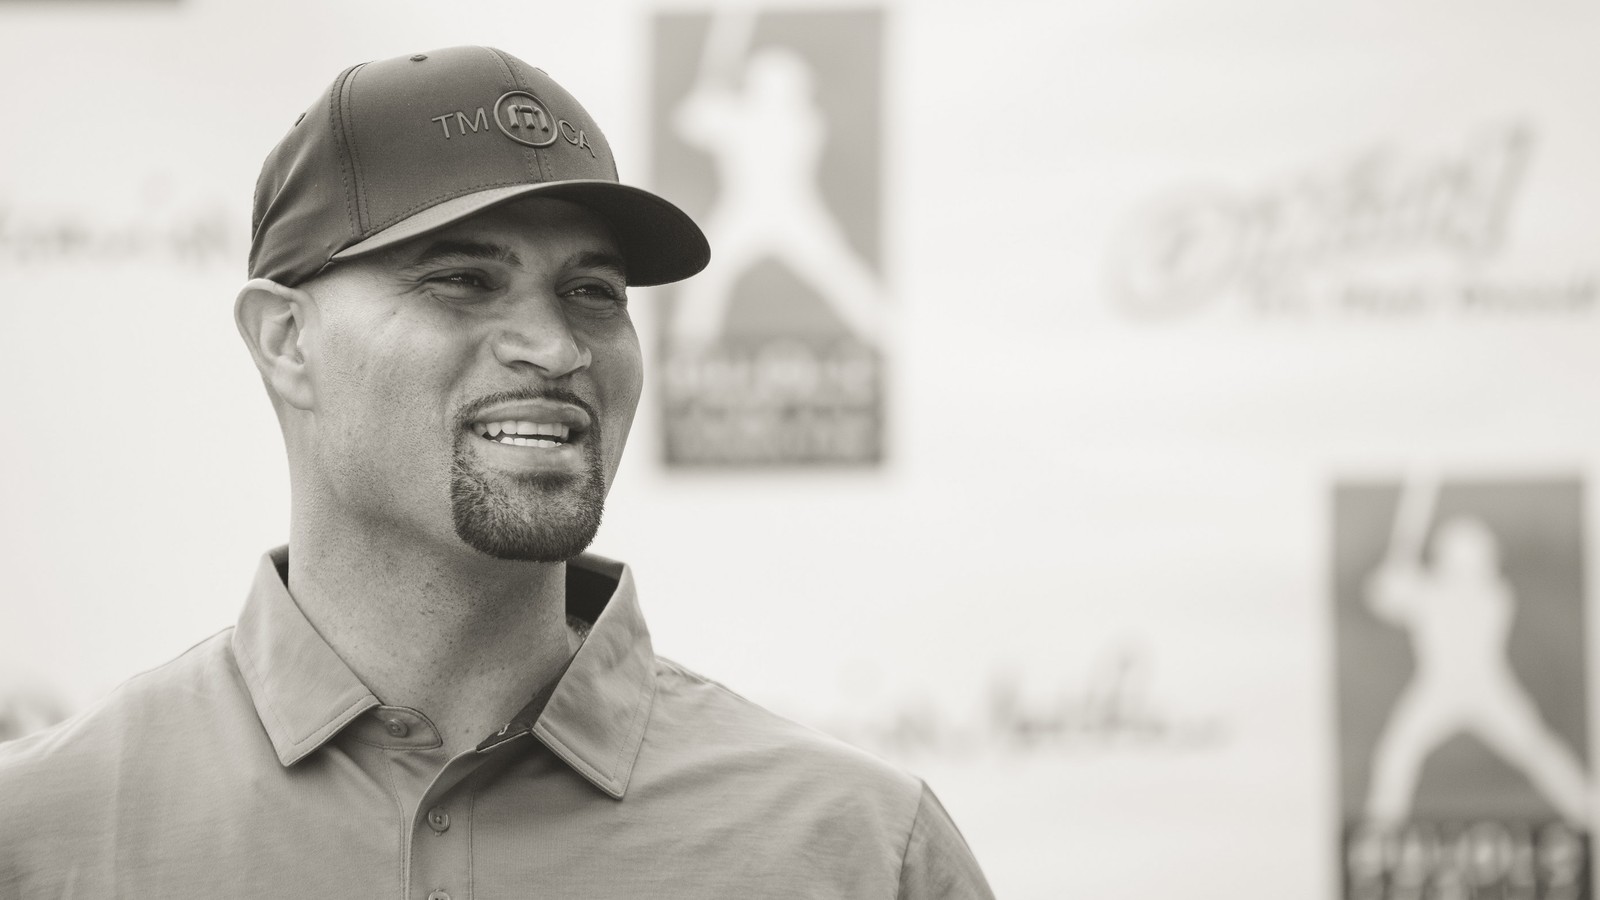 Albert Pujols stays connected with foundation